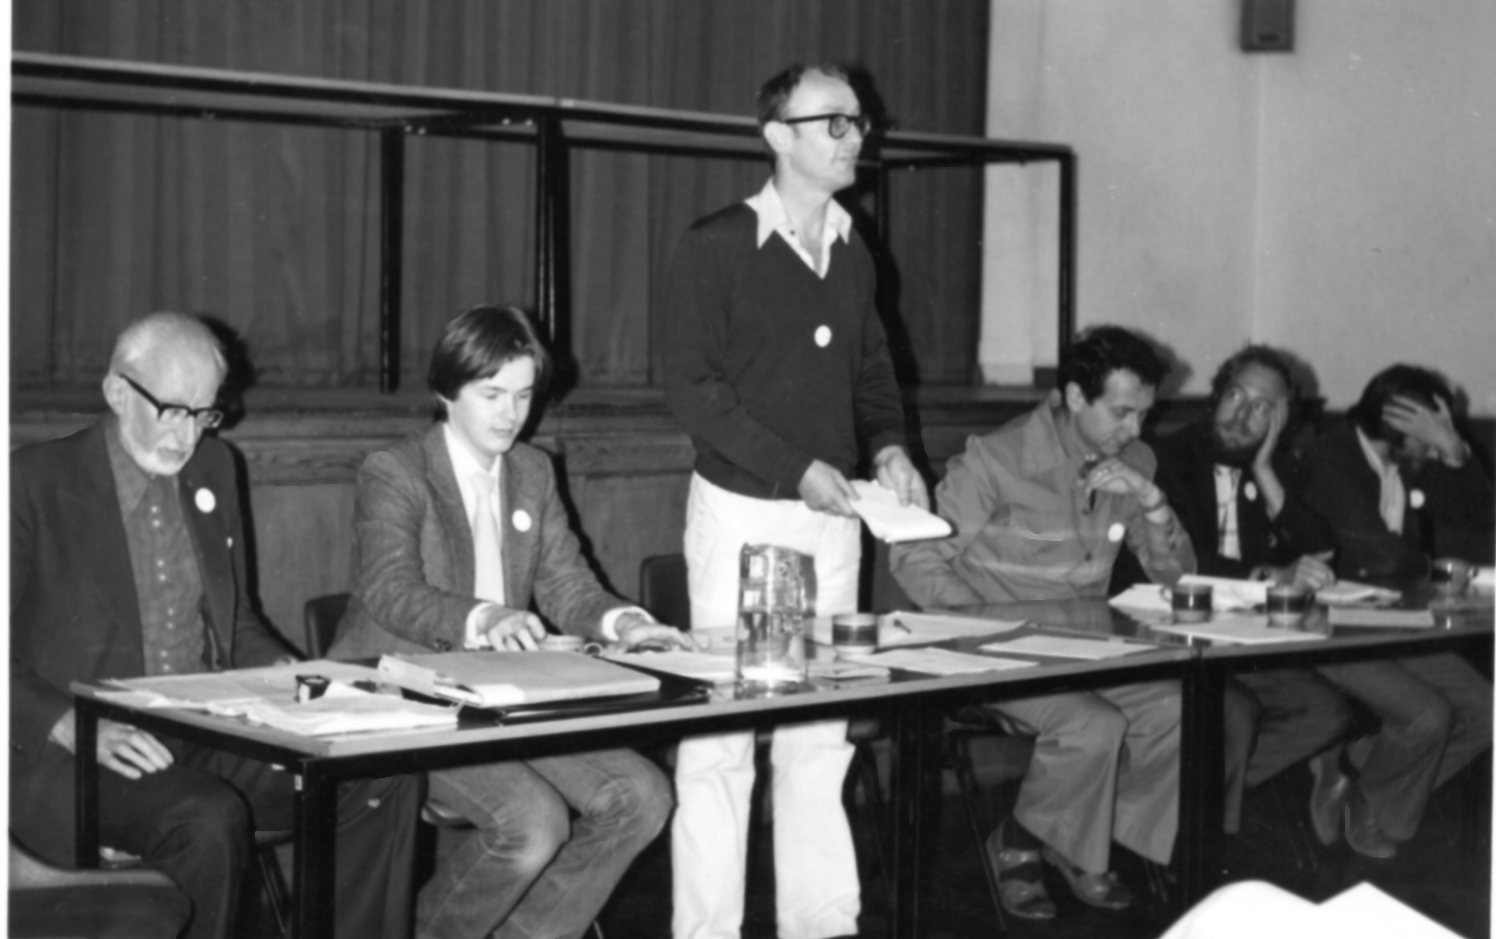 A black and white image of a board of trustees at a meeting, with one man standing and speaking